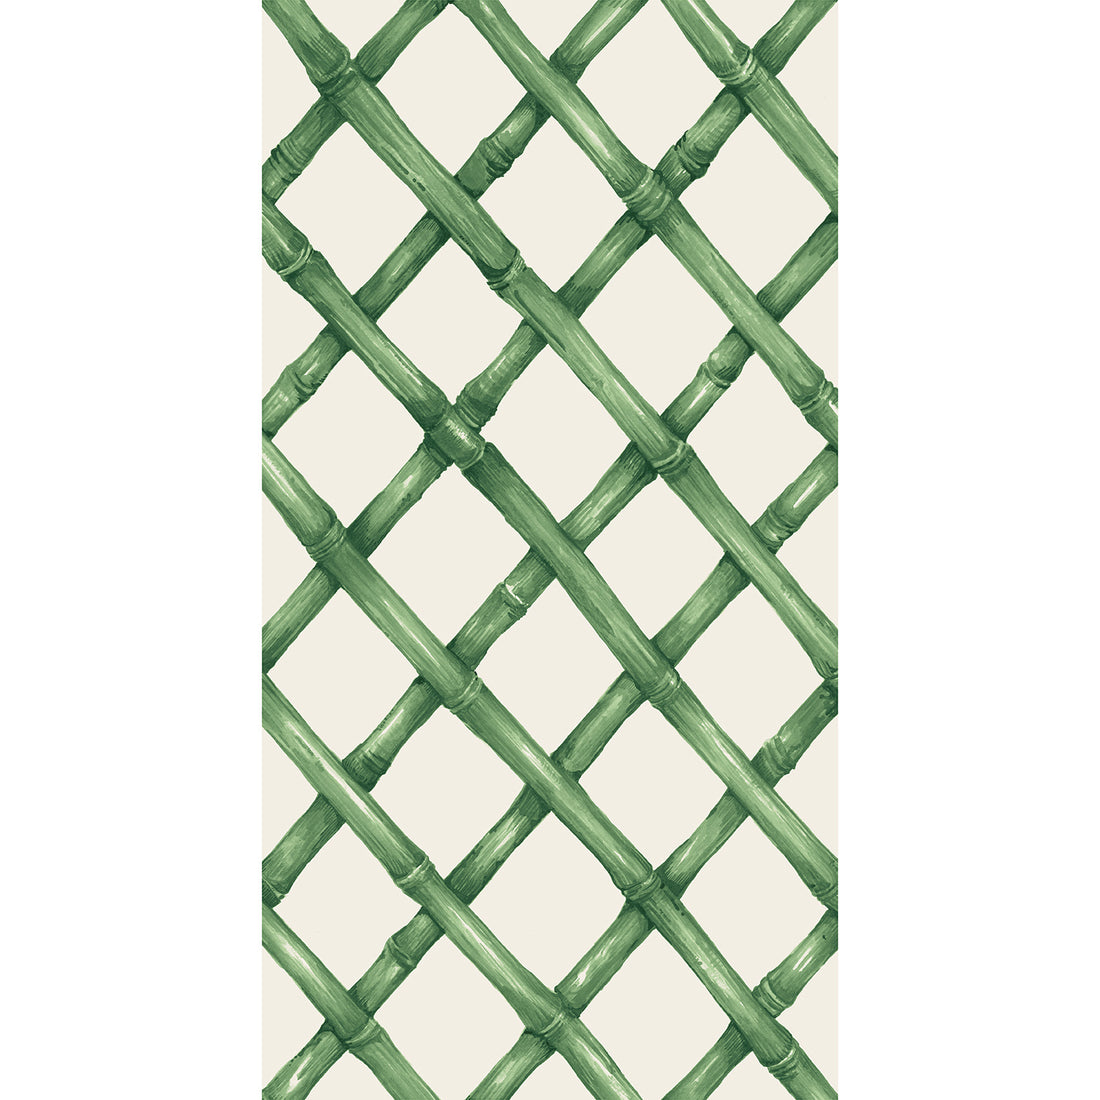 A diagonal woven bamboo pattern in monochrome green on a white background, on a rectangle guest napkin.